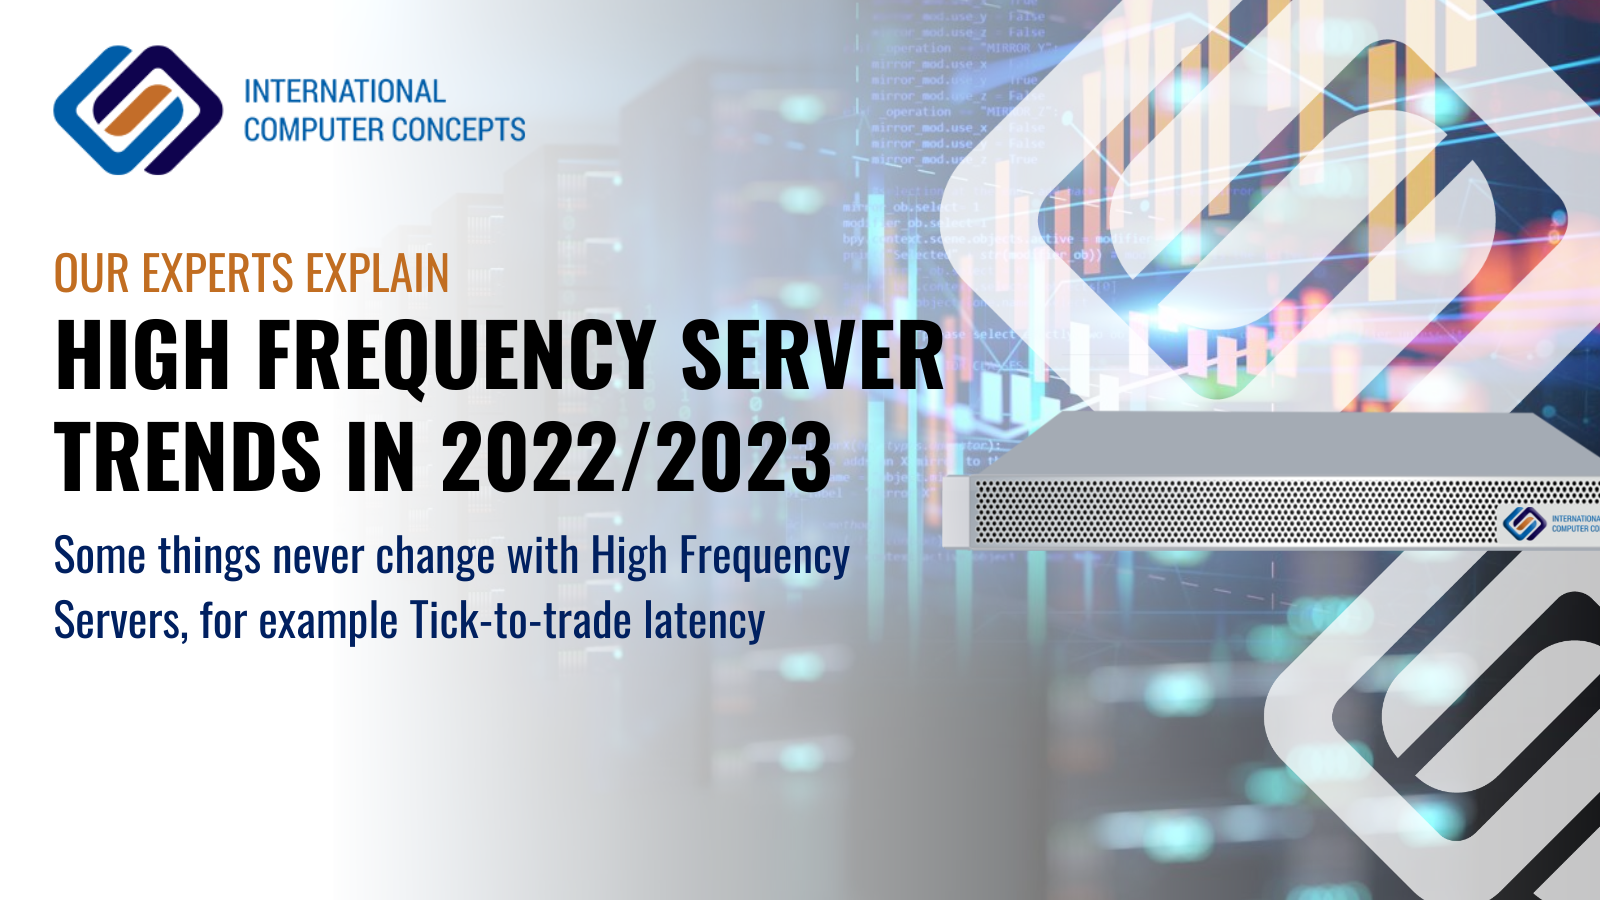 High Frequency Servers in 2022/2023